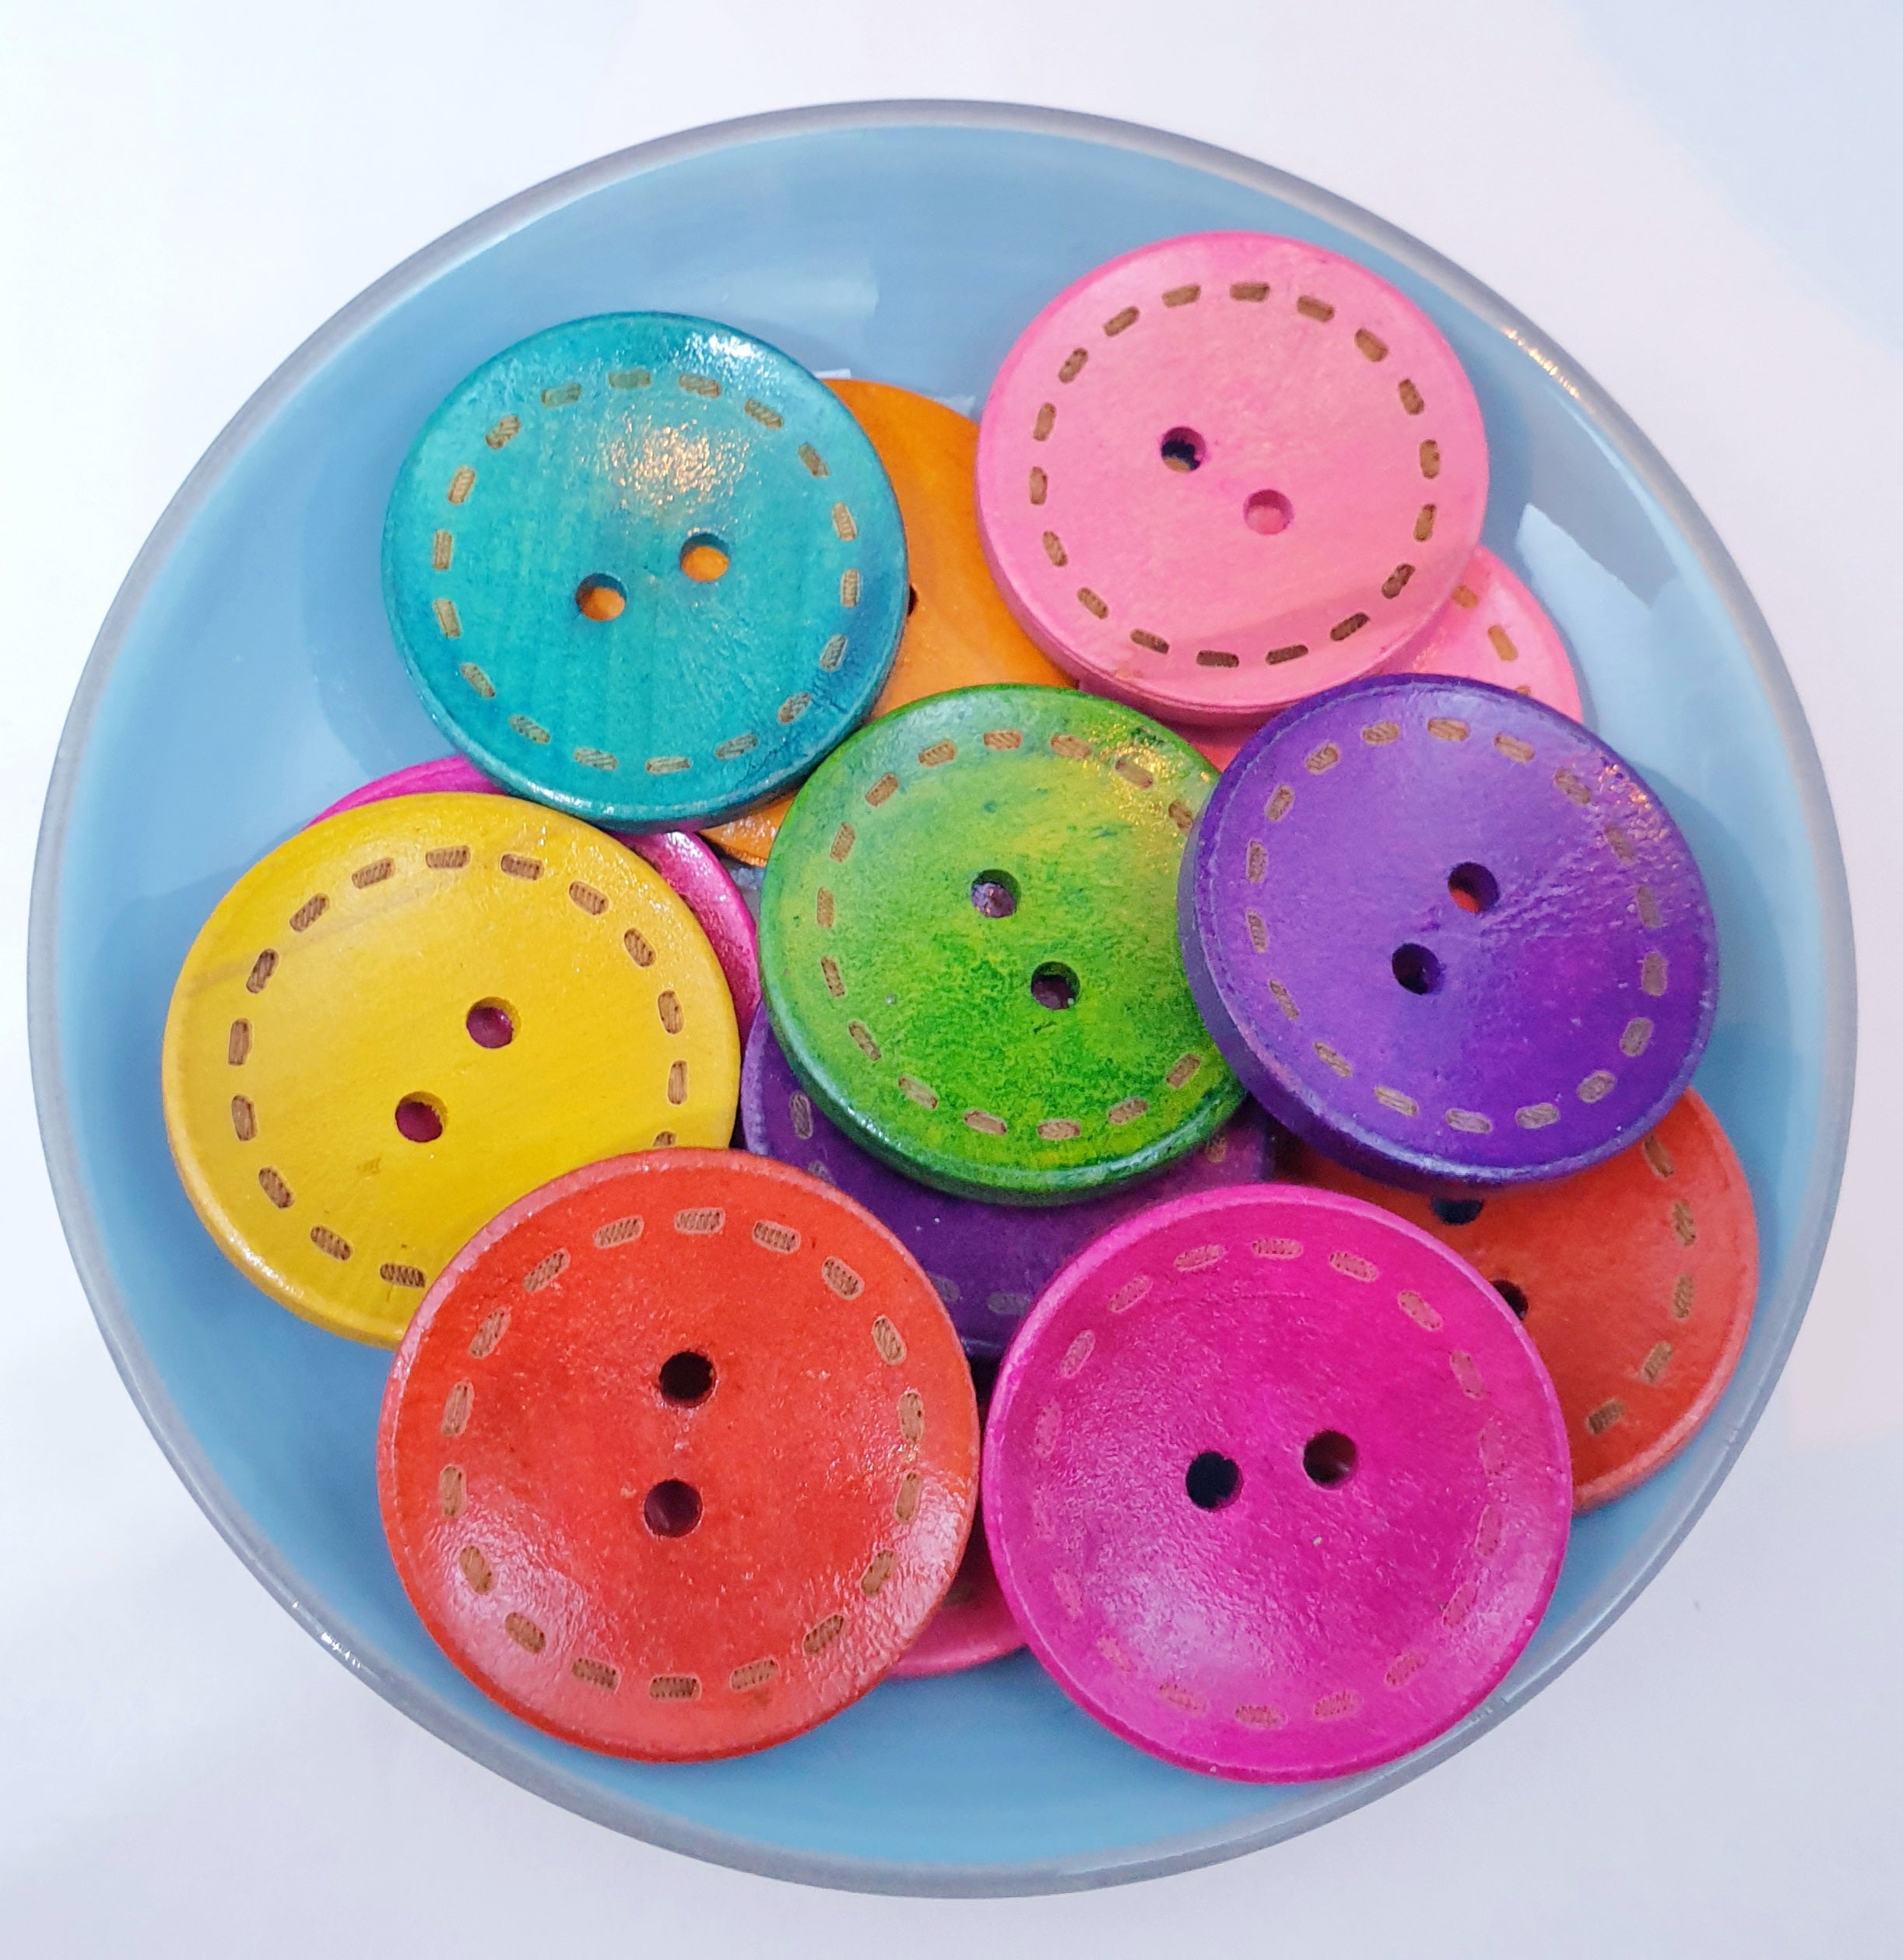 MajorCrafts 16pcs 30mm Mixed Colours Stitch Pattern Round 2 Holes Large Wooden Sewing Buttons